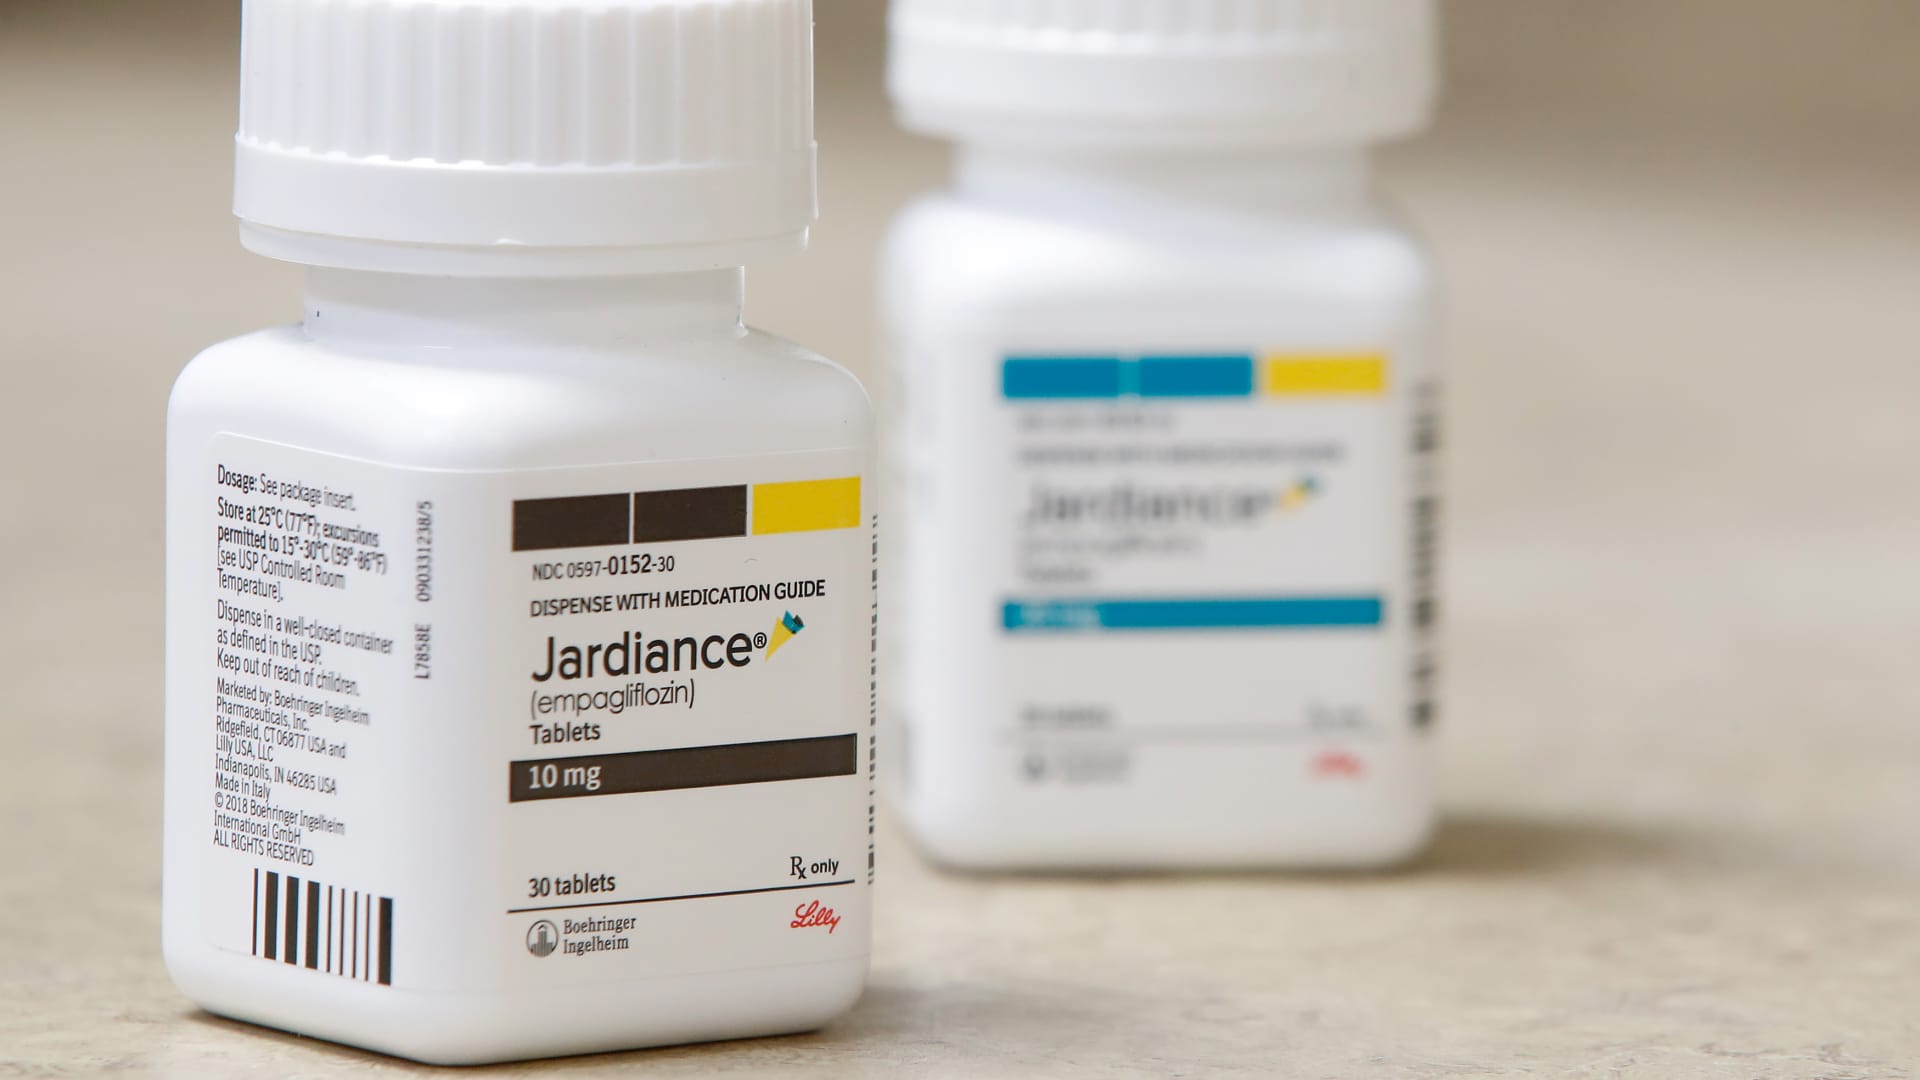 Here are the 3 most-used drugs on the Medicare price negotiation list